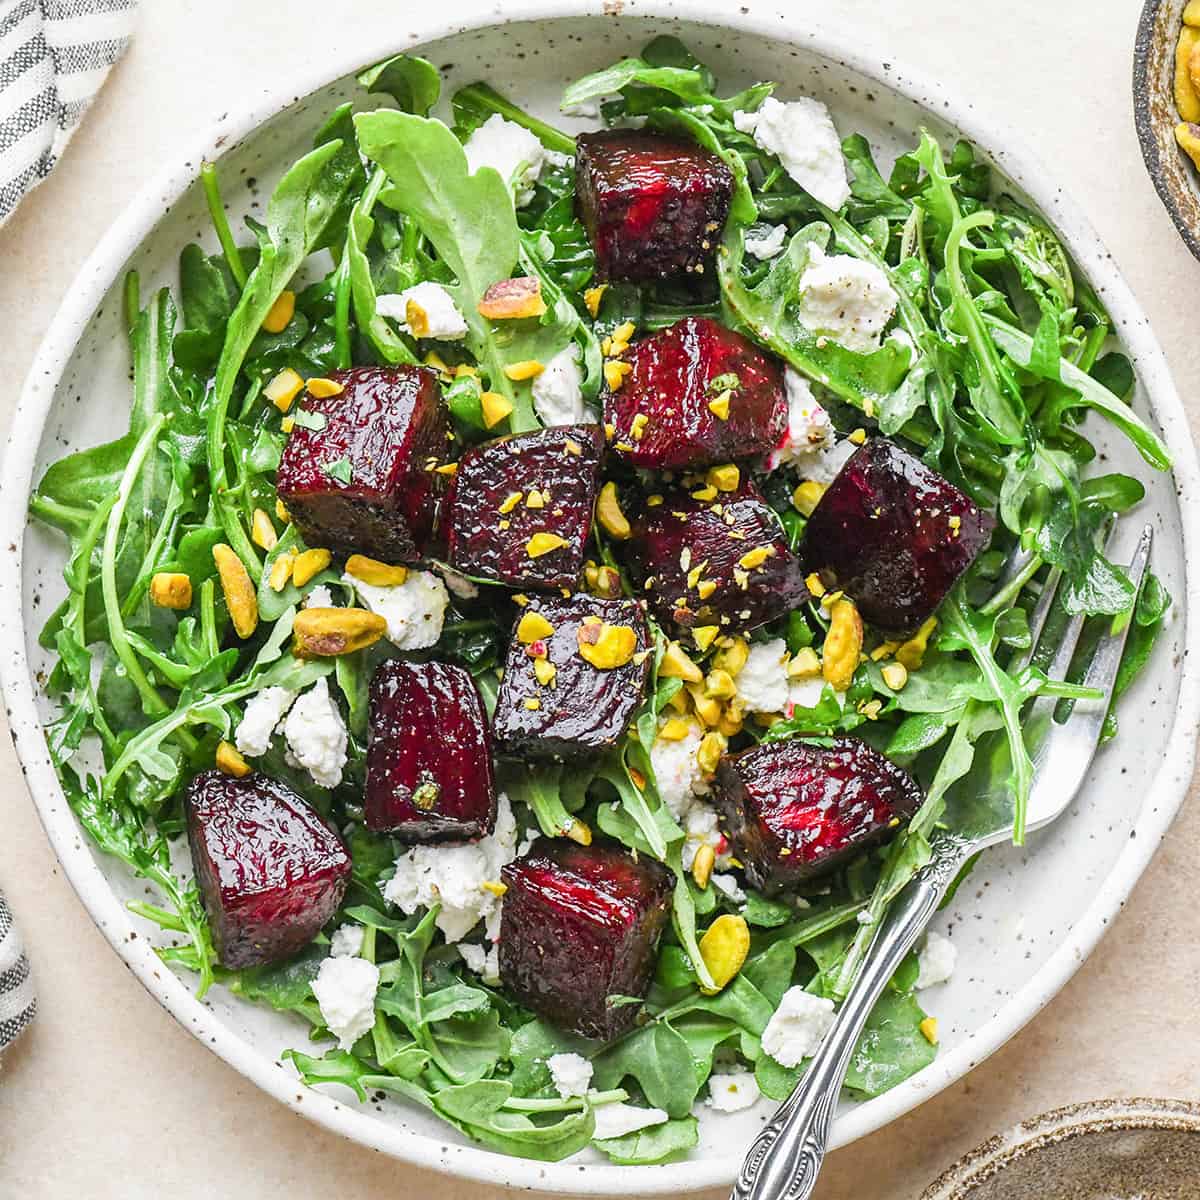 oven roasted beets on top of a salad